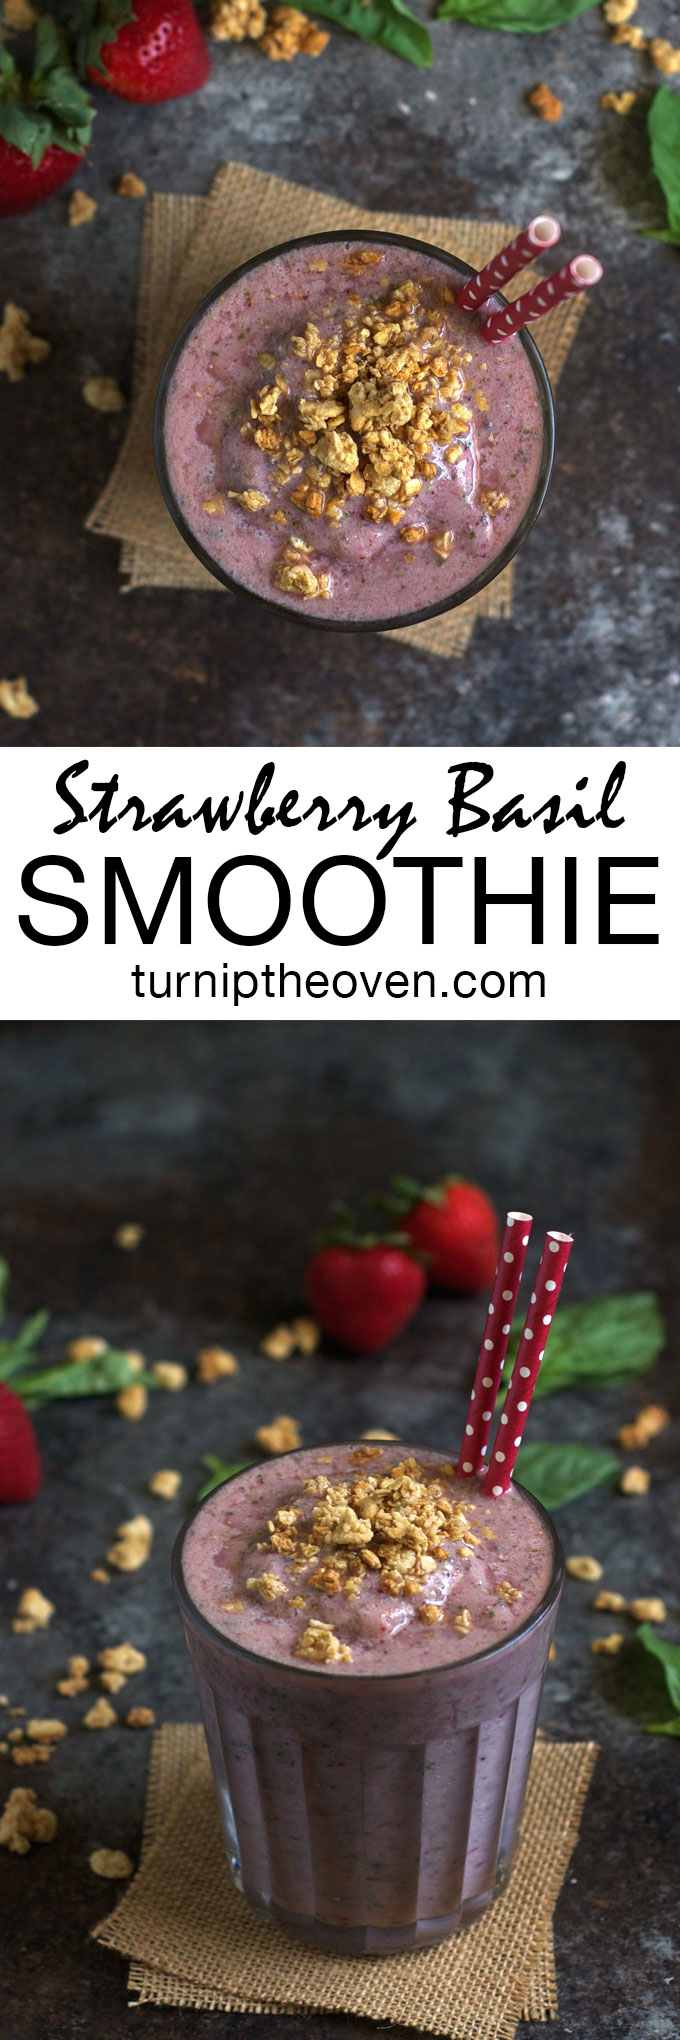 This gluten-free, vegan strawberry smoothie gets an unexpected burst of flavor from fresh basil. It's a delicious and healthy way to start your morning!